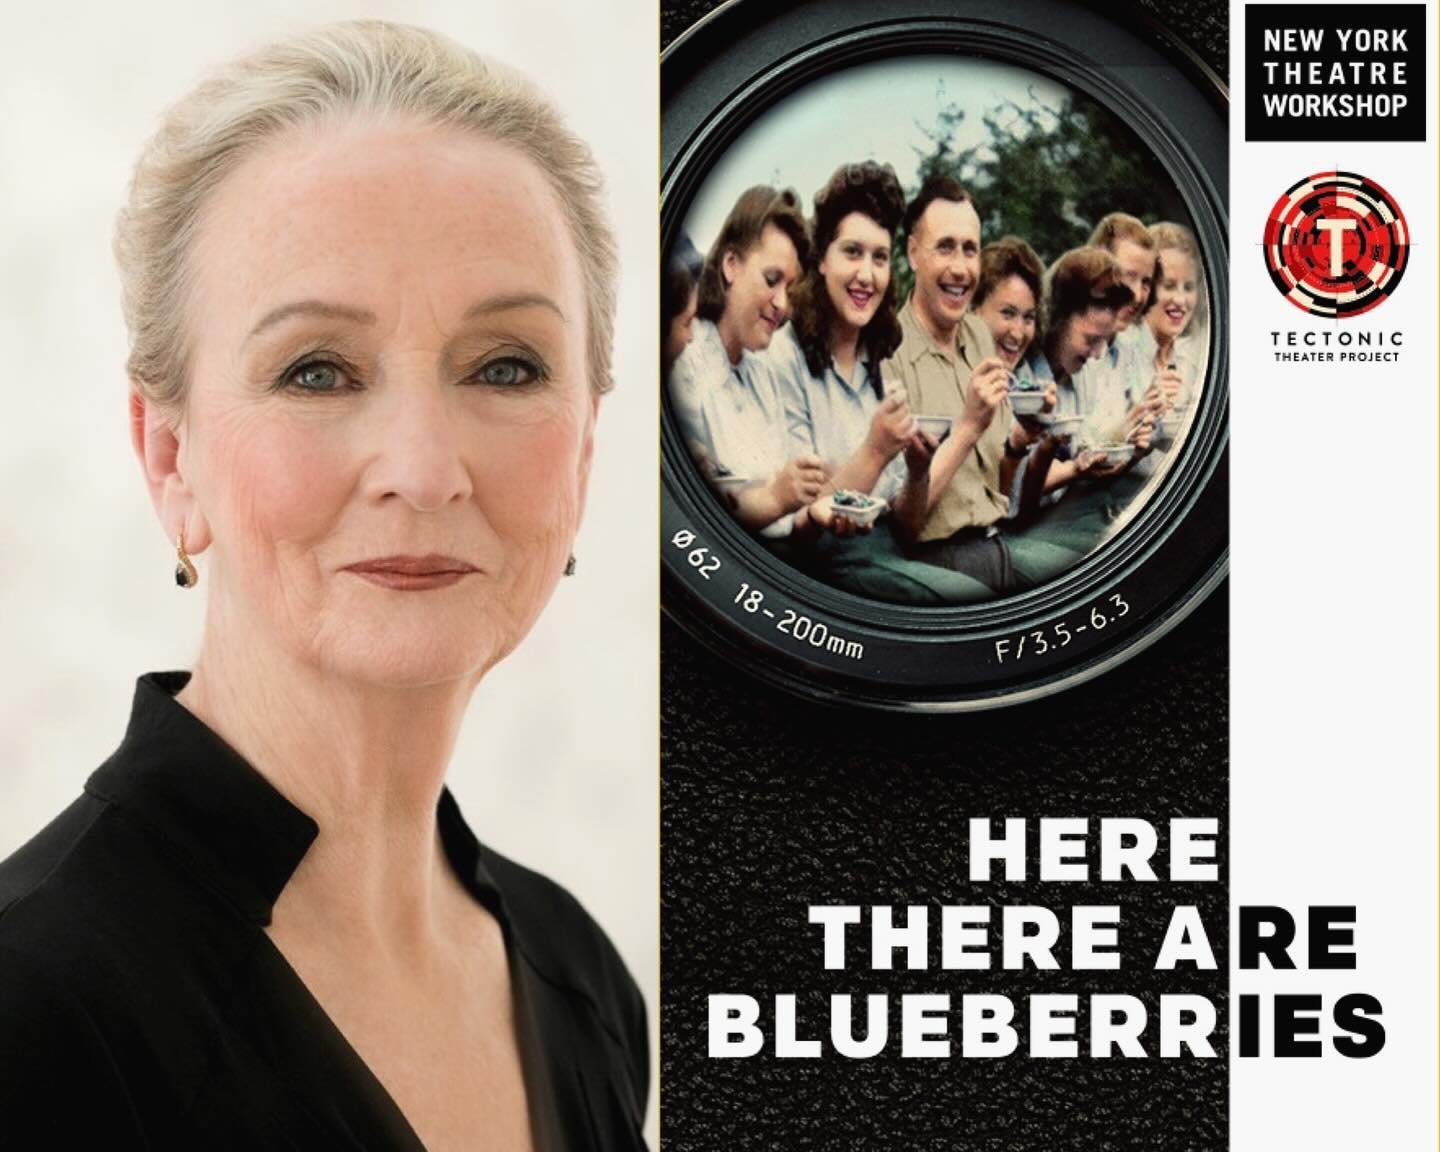 Wishing a Happy Opening Night to Kathleen Chalfant in HERE THERE ARE BLUEBERRIES at @nytw79! ⭐️